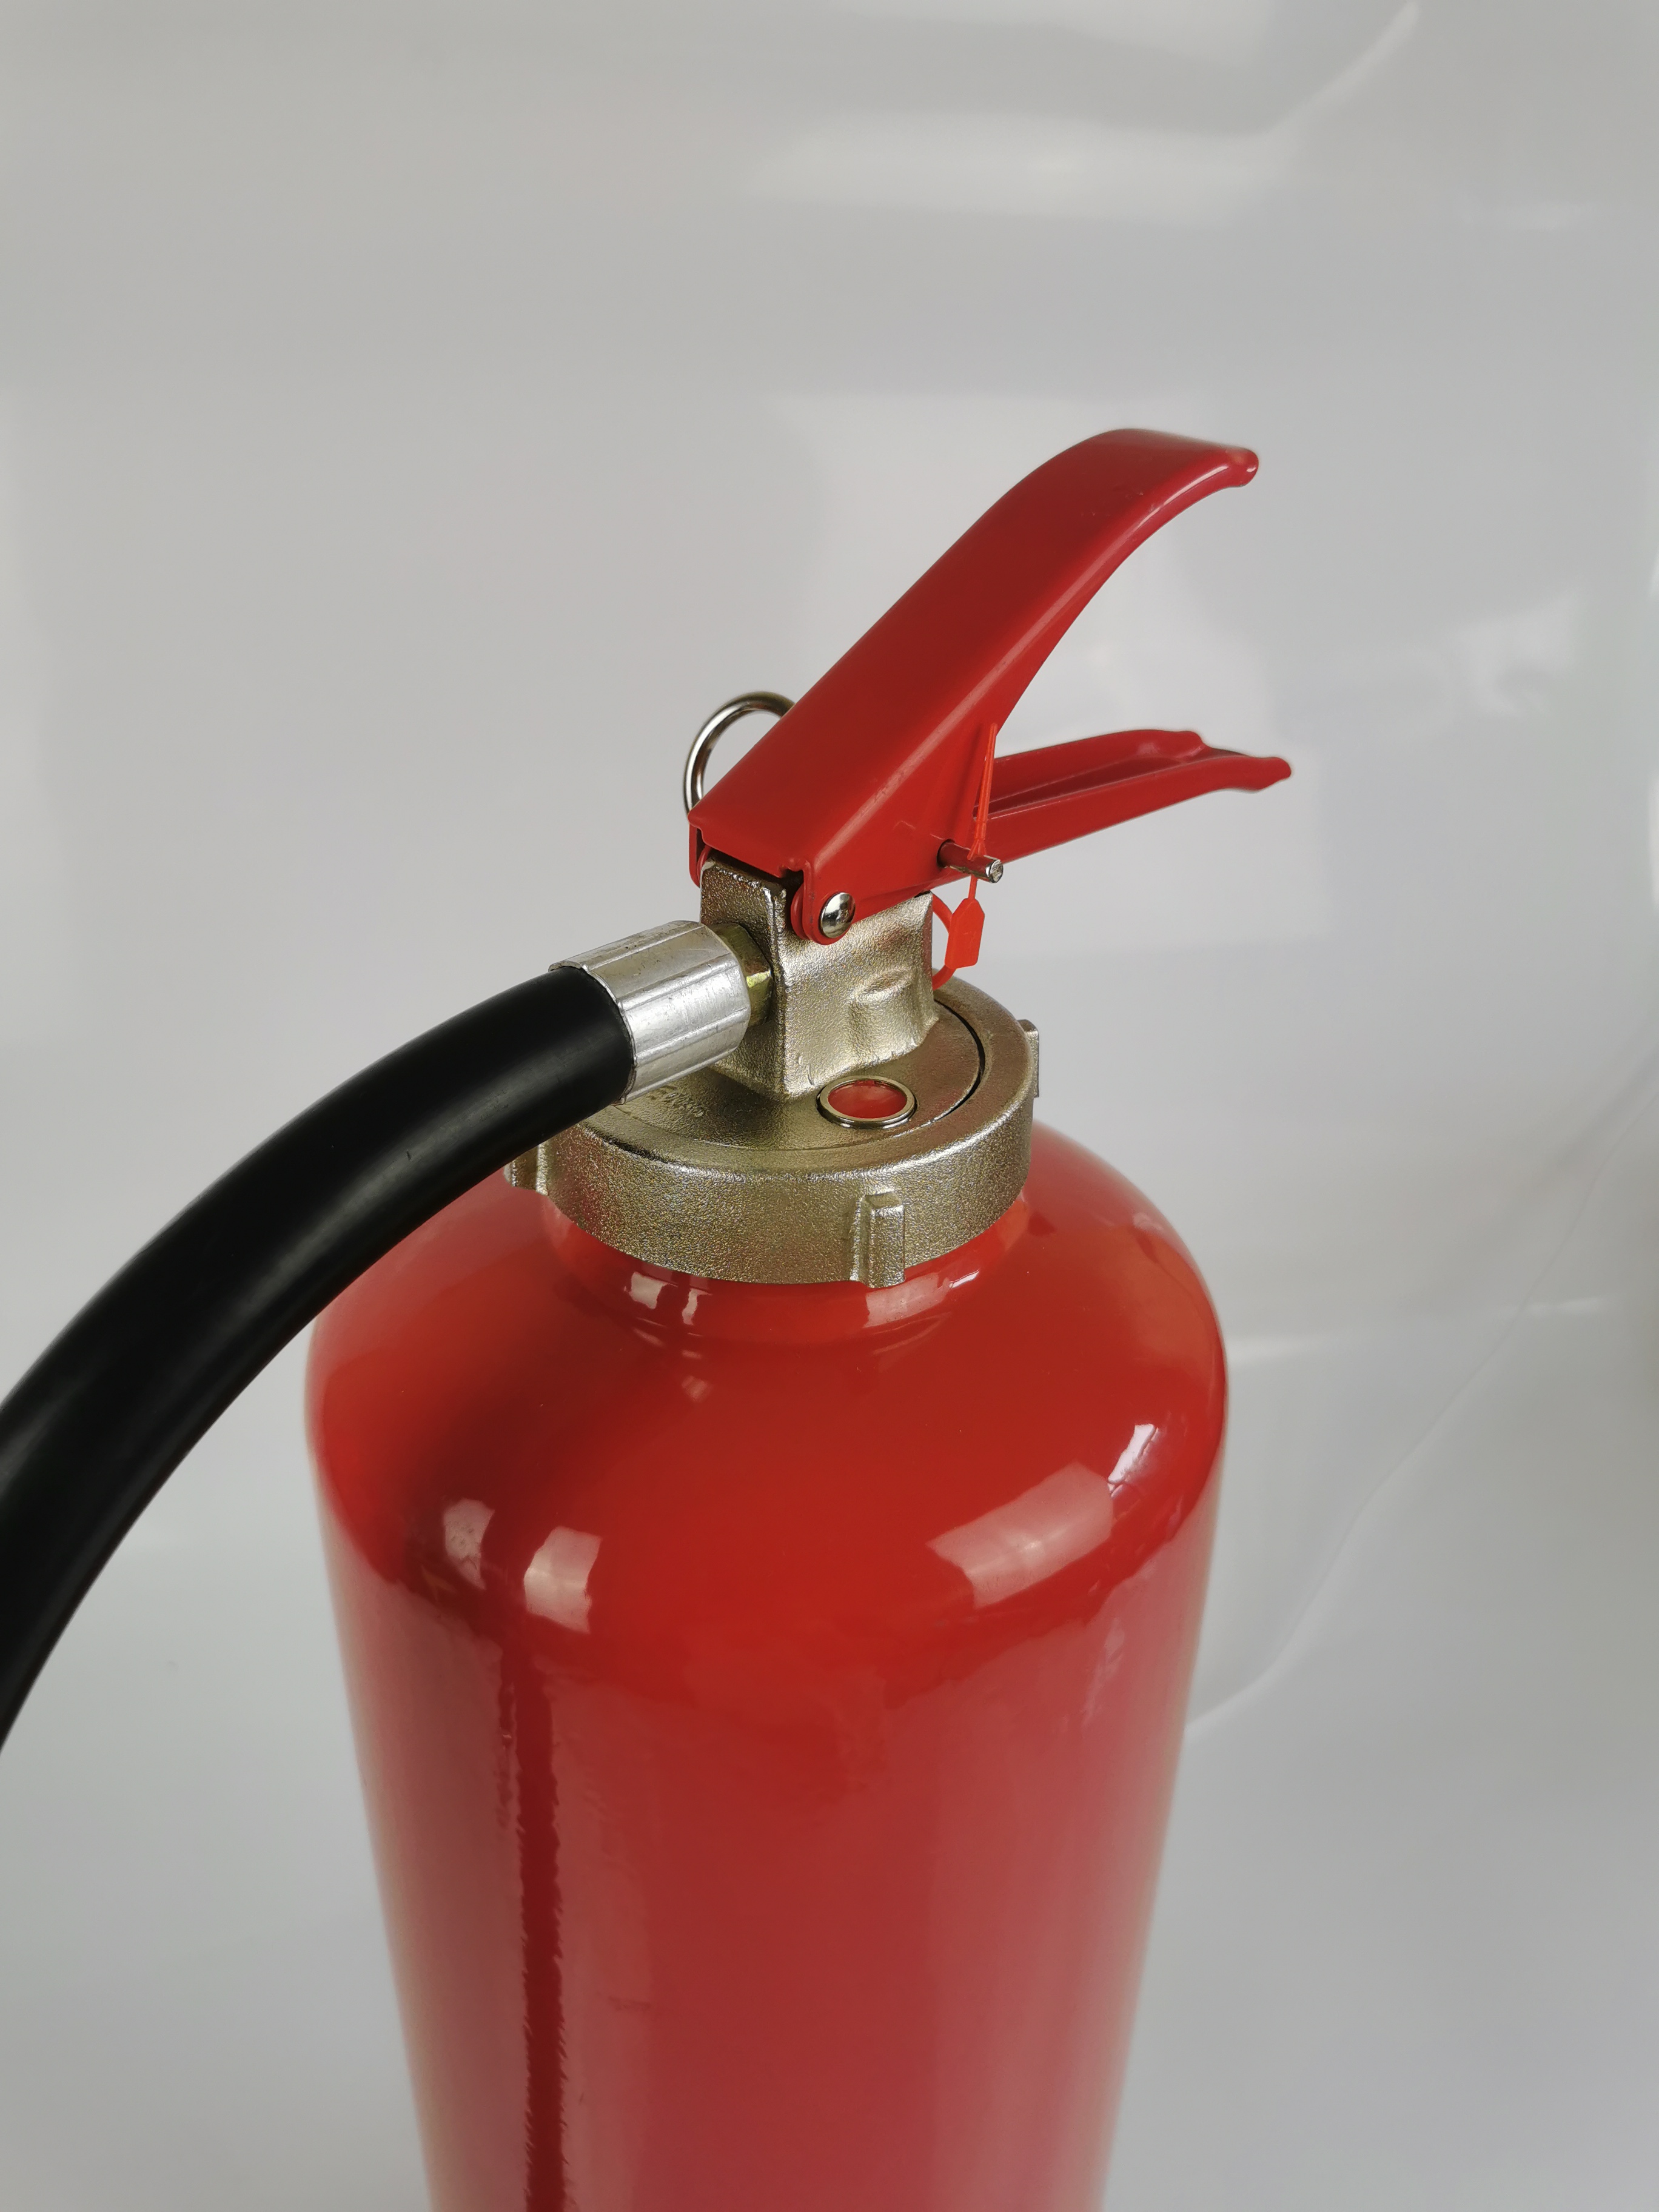 6Kg Built-in portable dry powder fire extinguisher